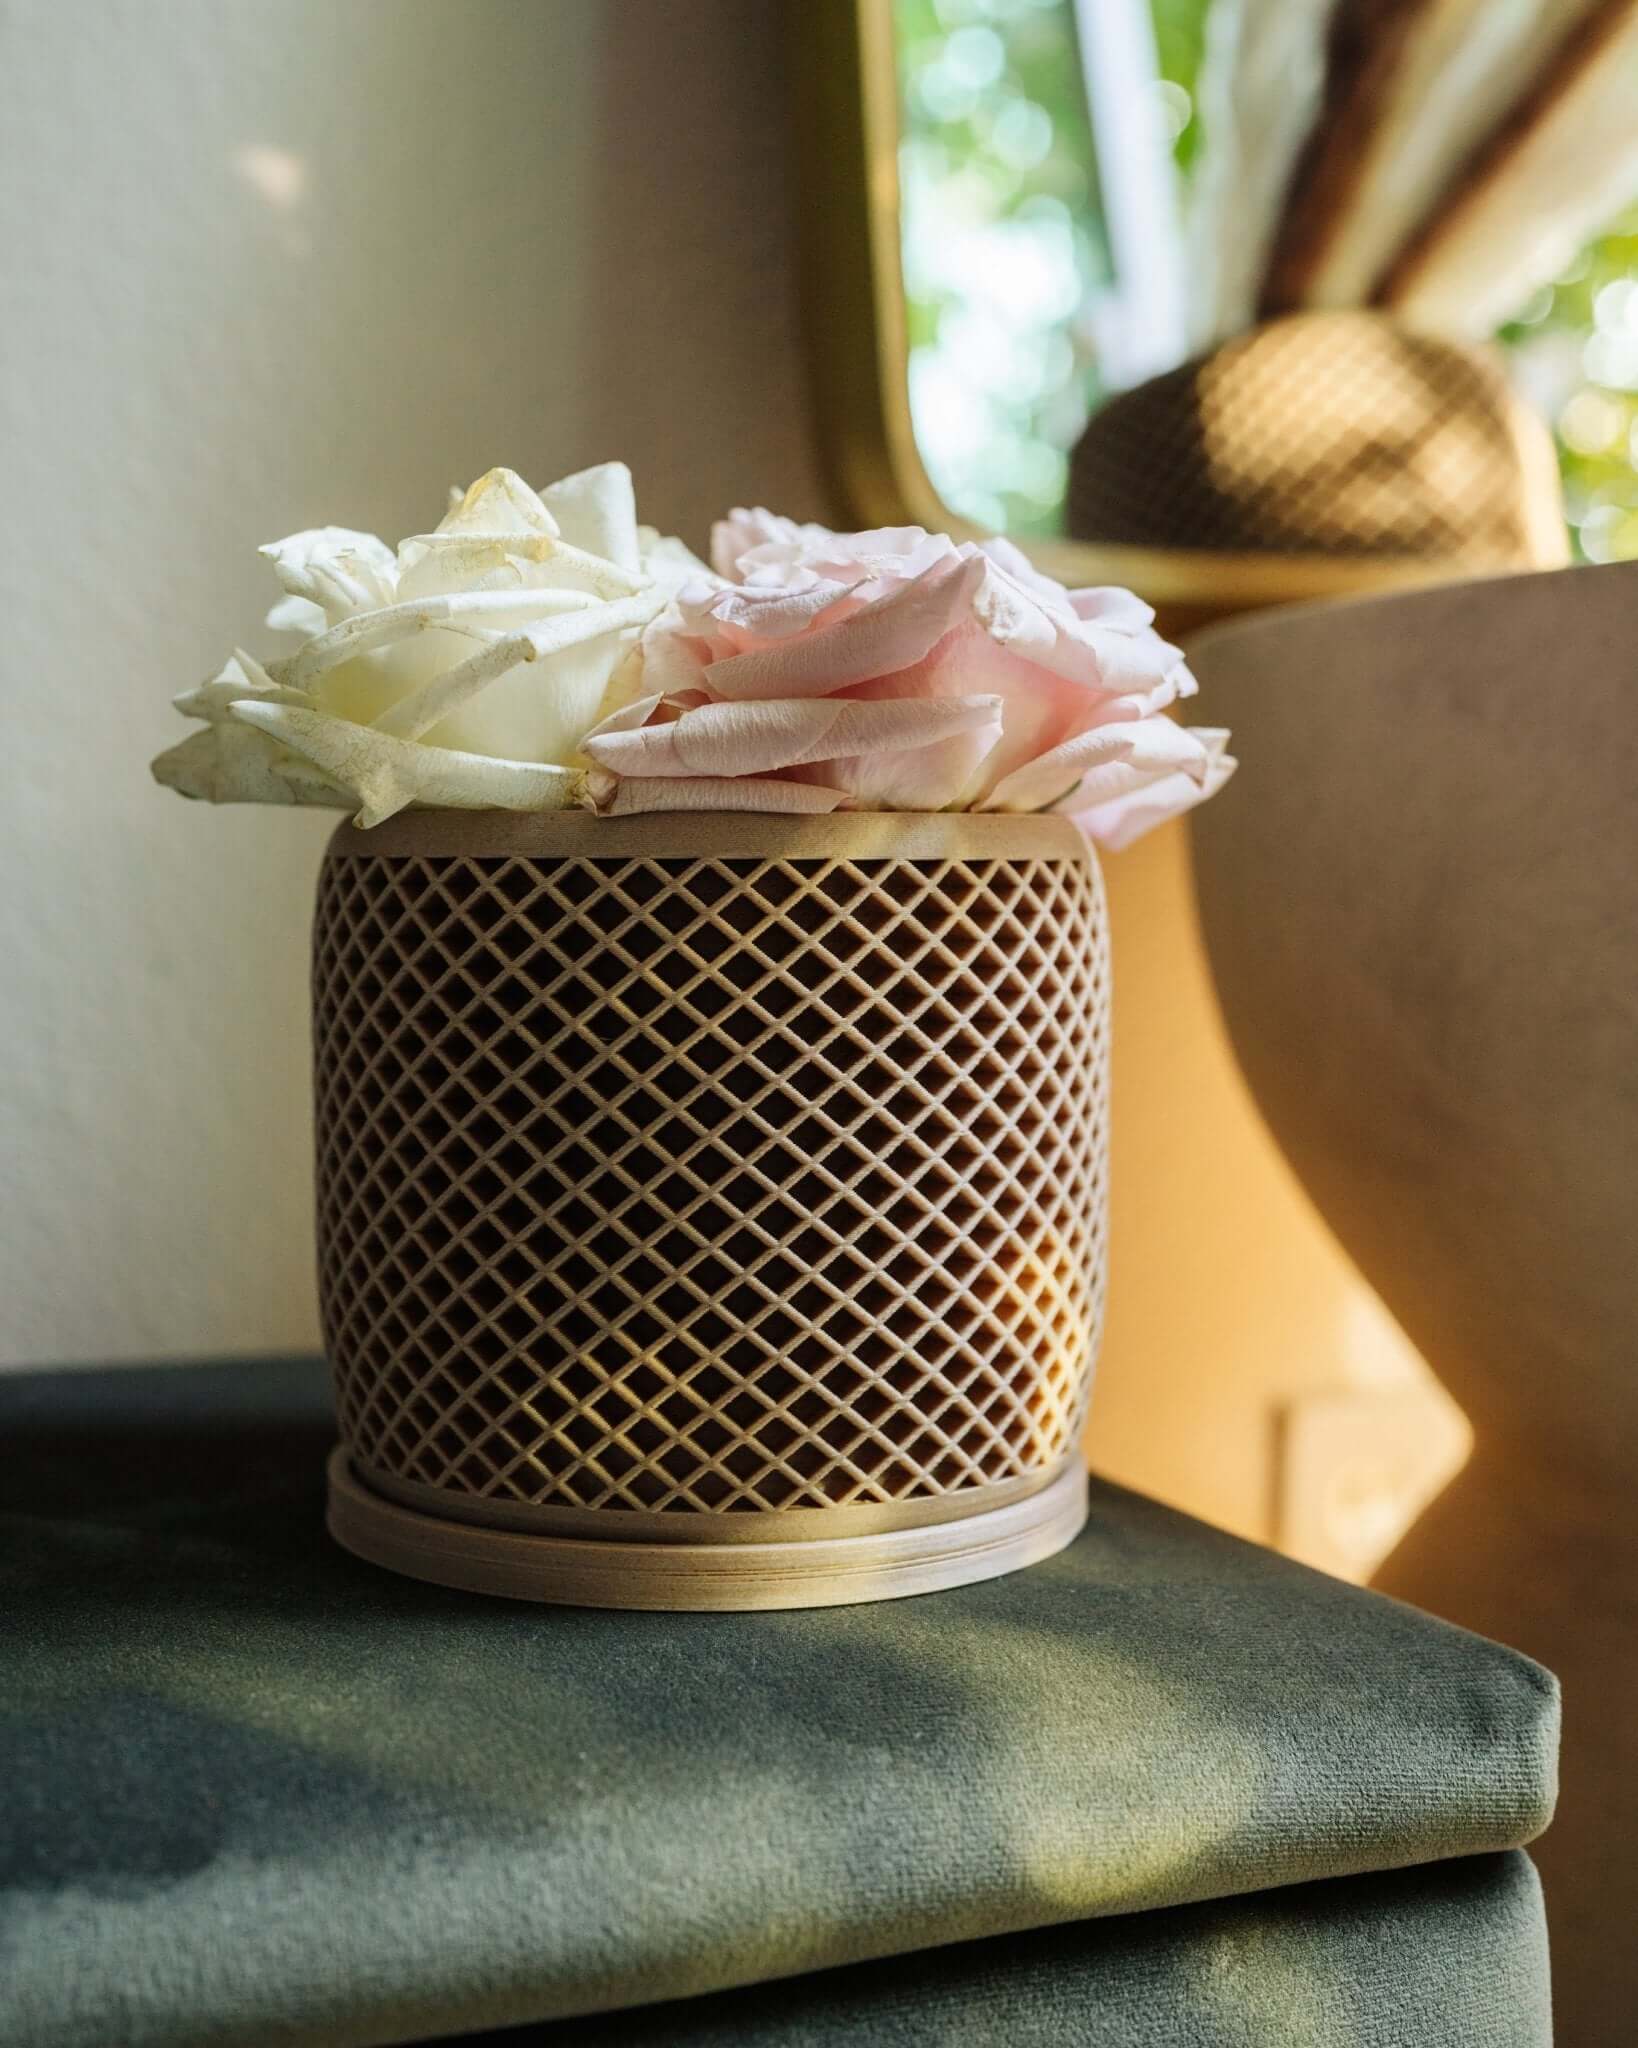 VISION™ geometric pot with white roses.